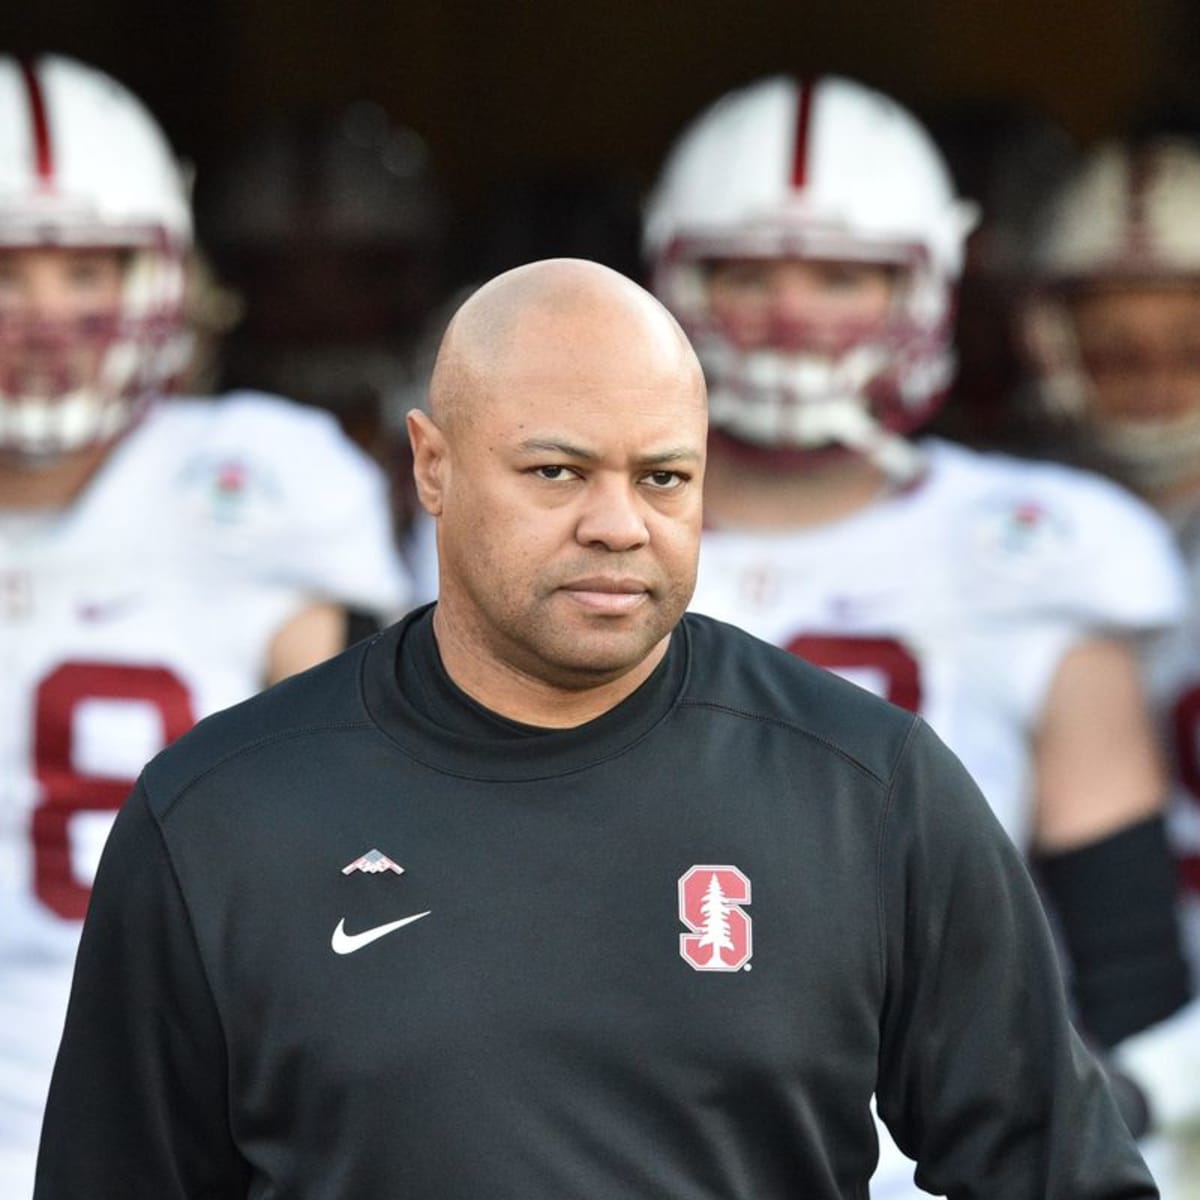 Salary info revealed for David Shaw and Pat Fitzgerald - Footballscoop